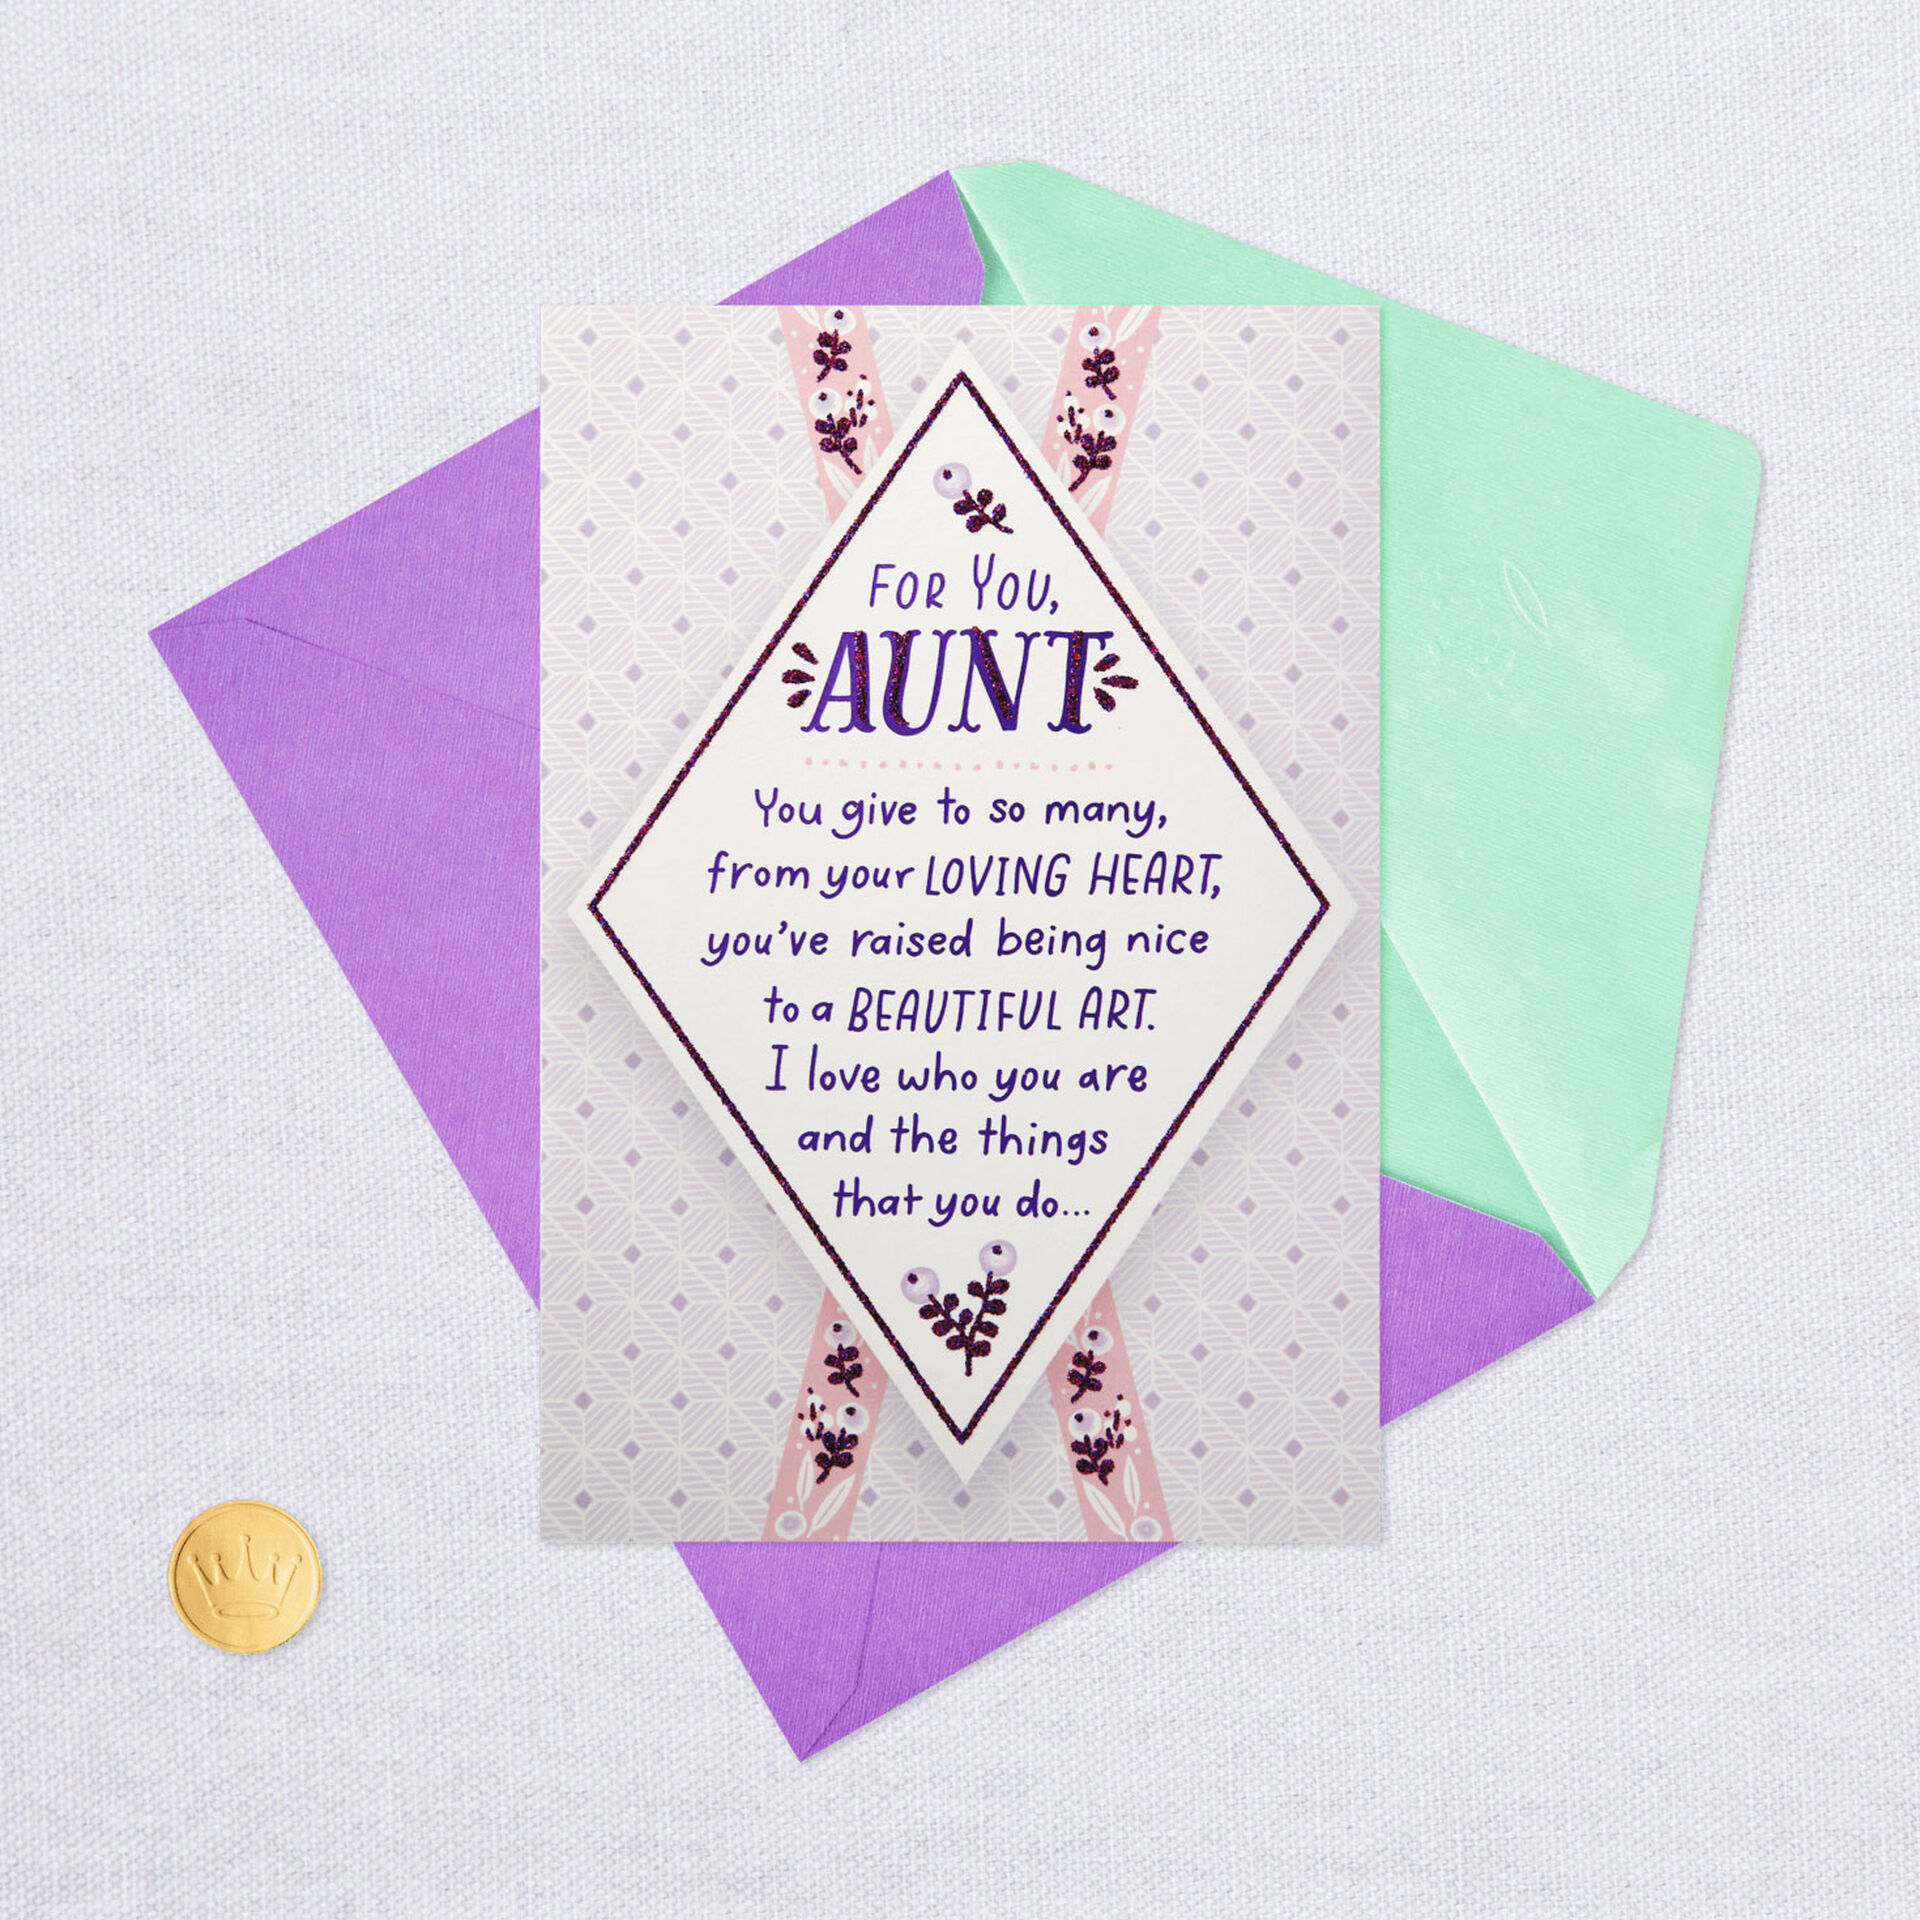 your-loving-heart-mother-s-day-card-for-aunt-greeting-cards-hallmark